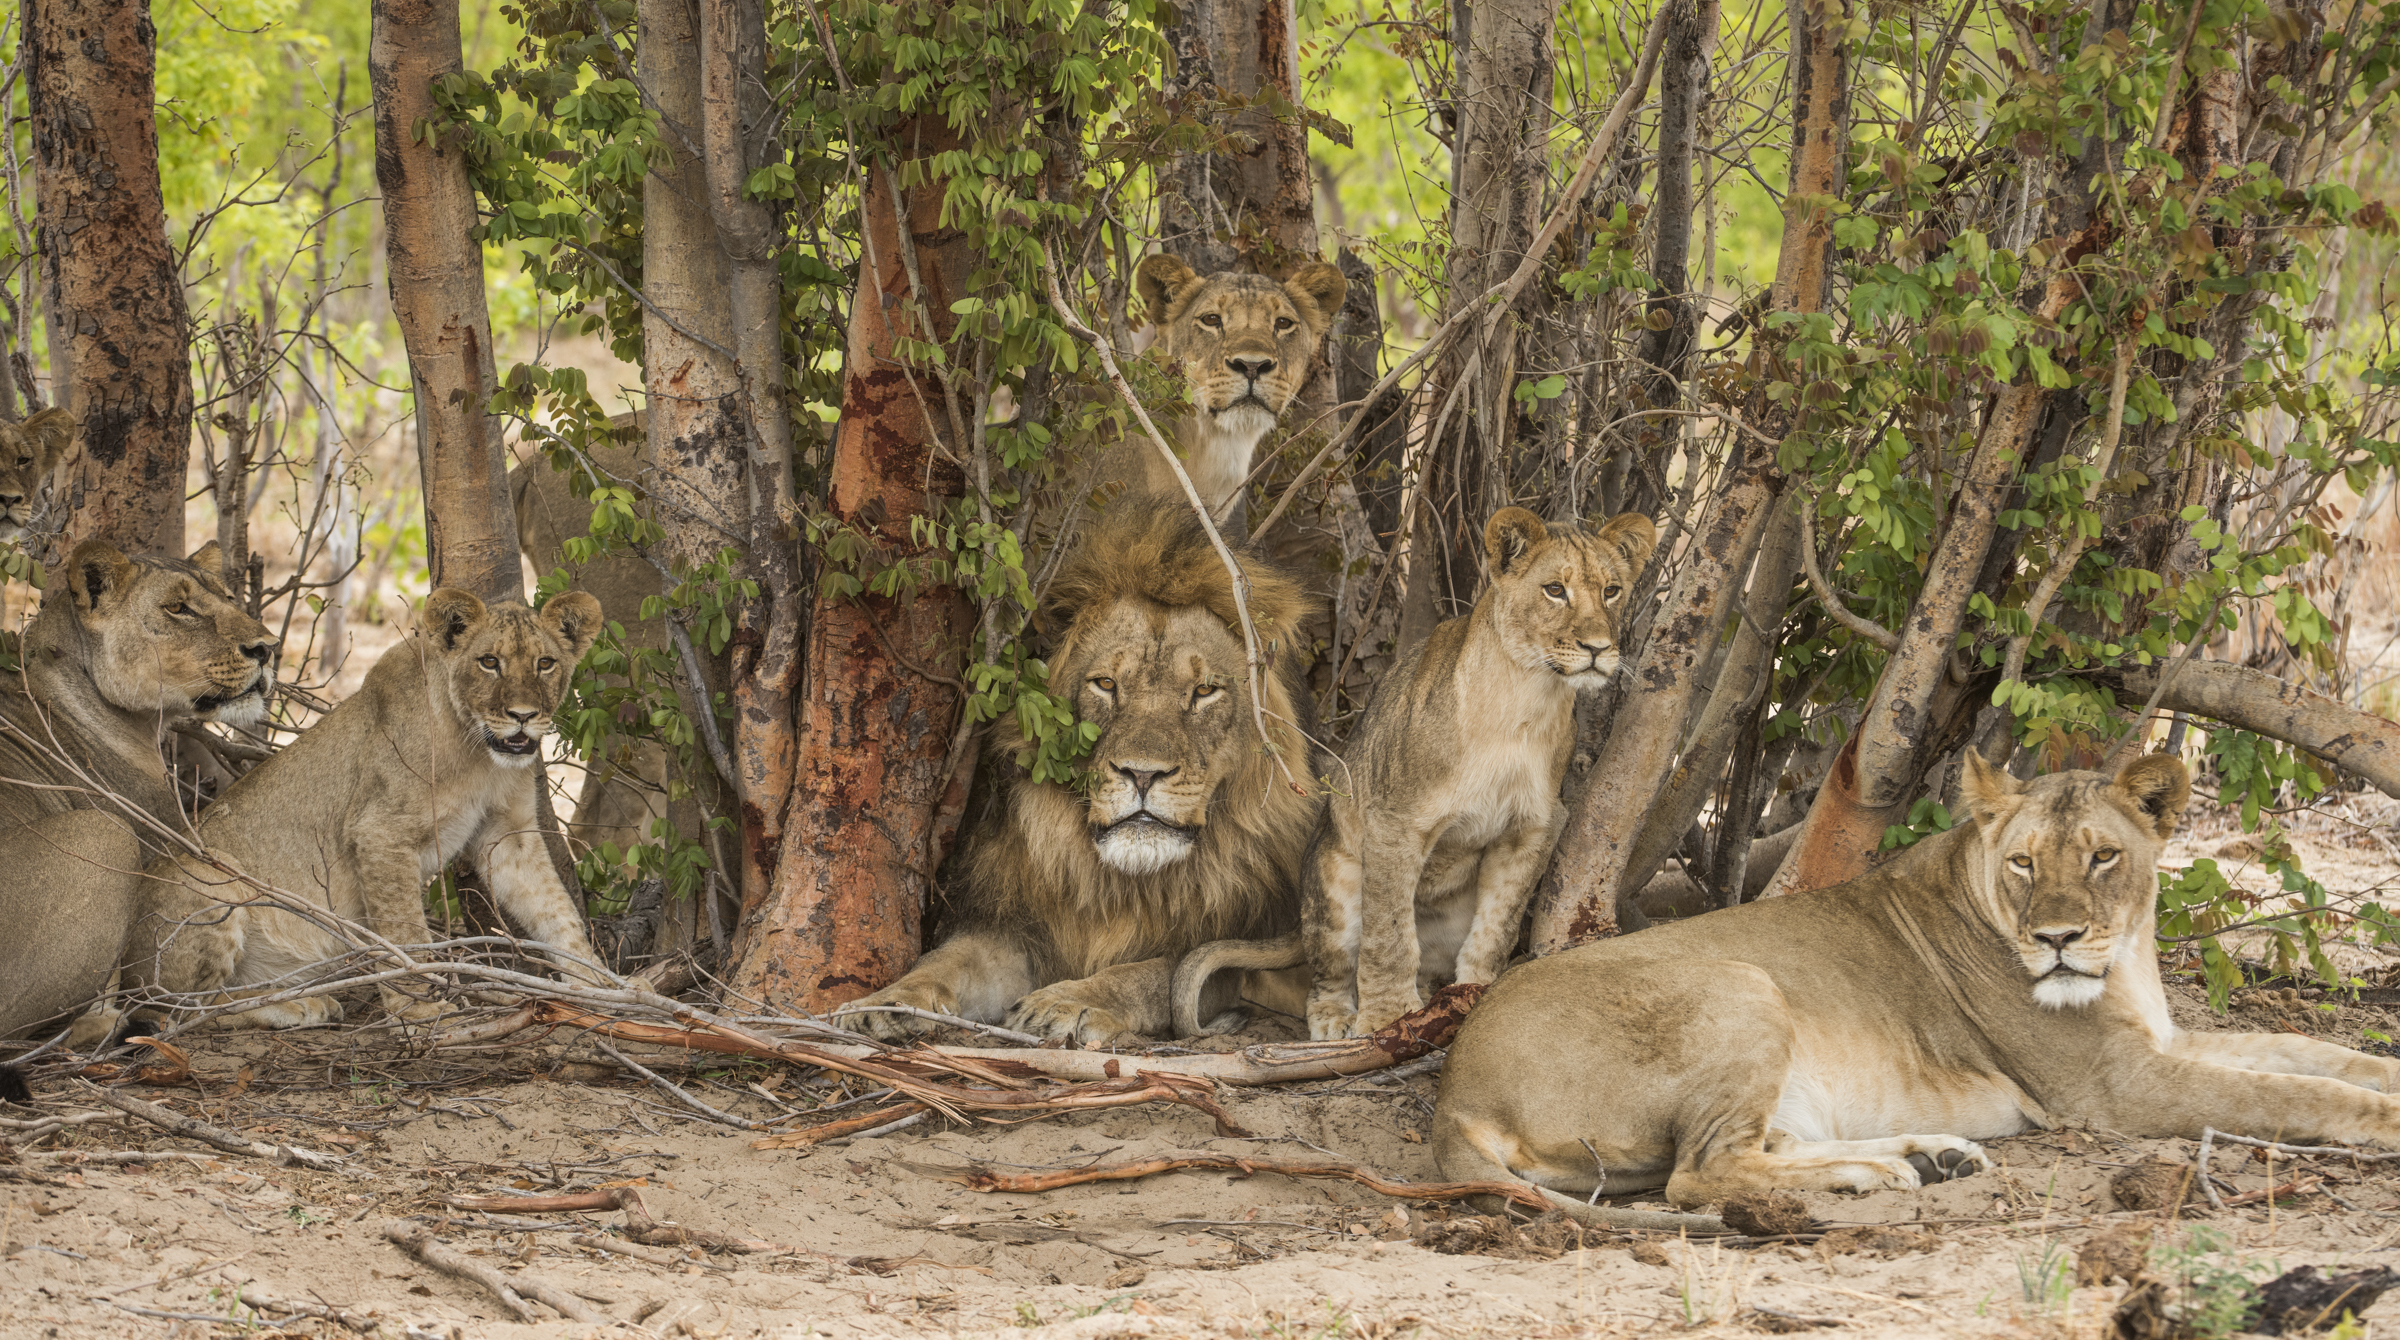 "A pack of lions sitting under shade"